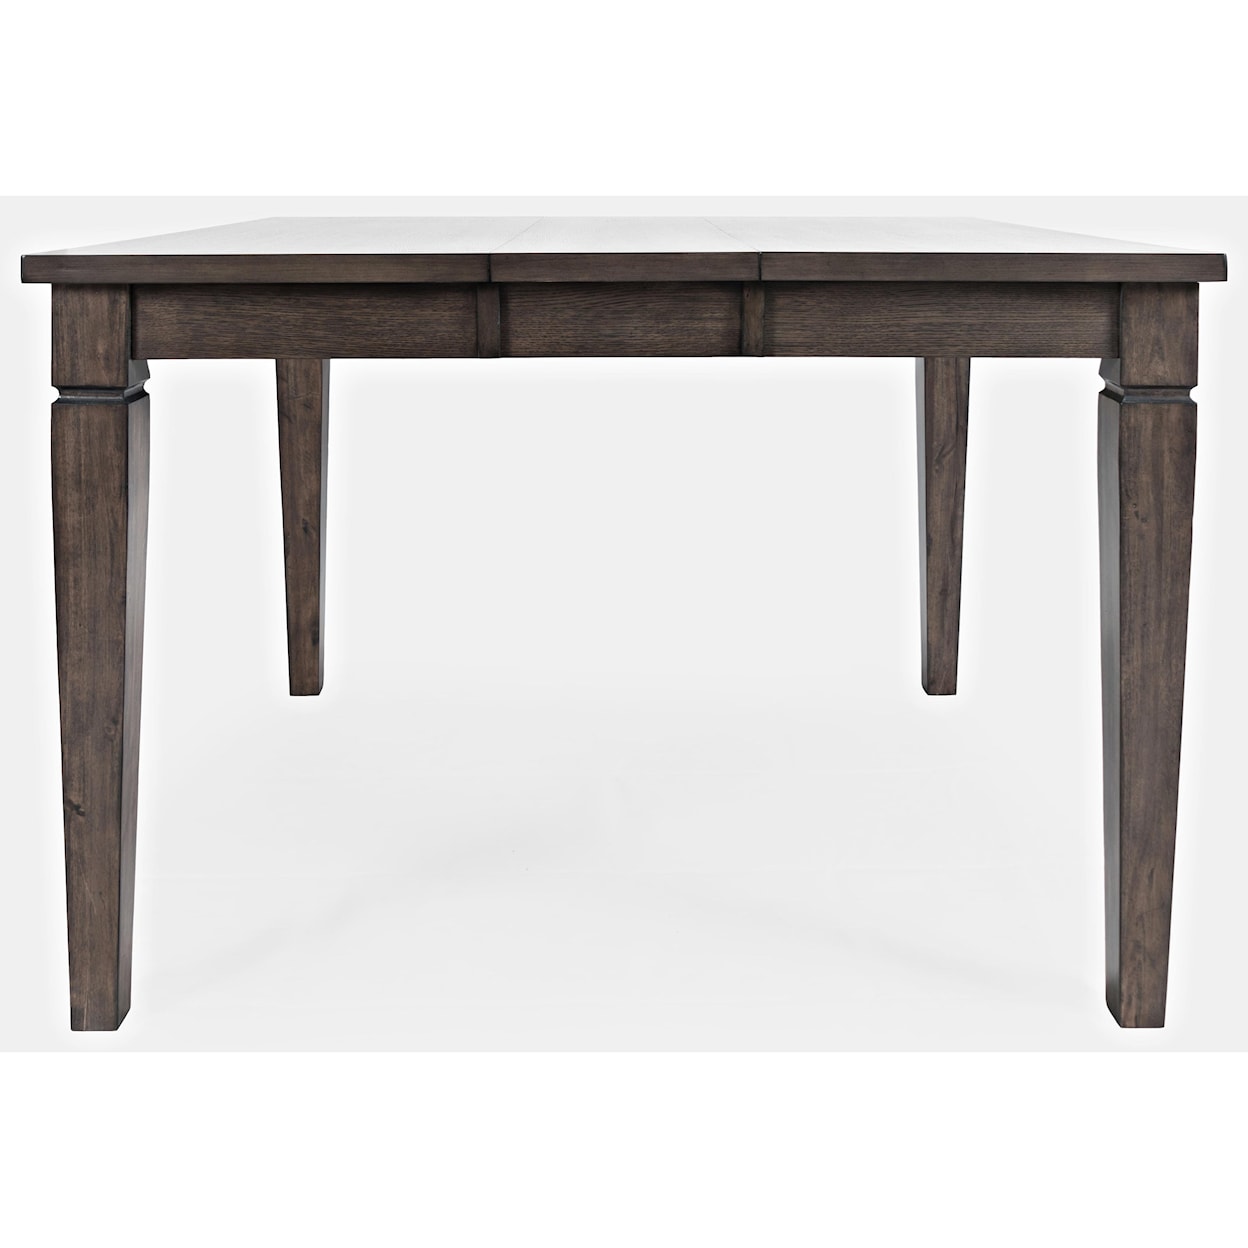 VFM Signature Lincoln Square Counter Height Table